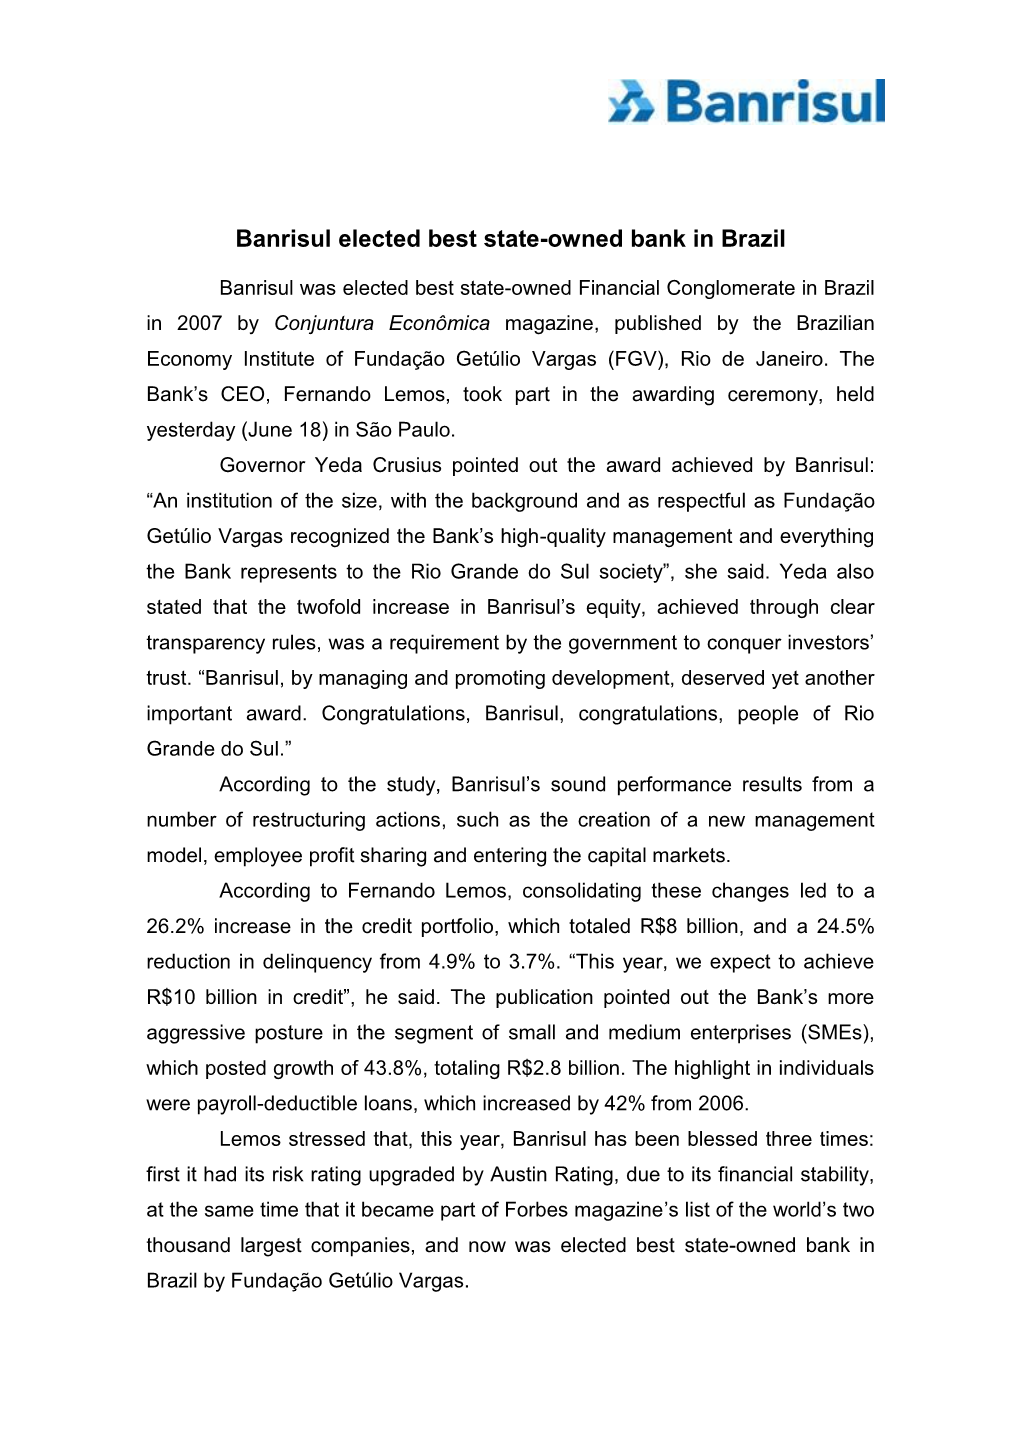 Banrisul Elected Best State-Owned Bank in Brazil